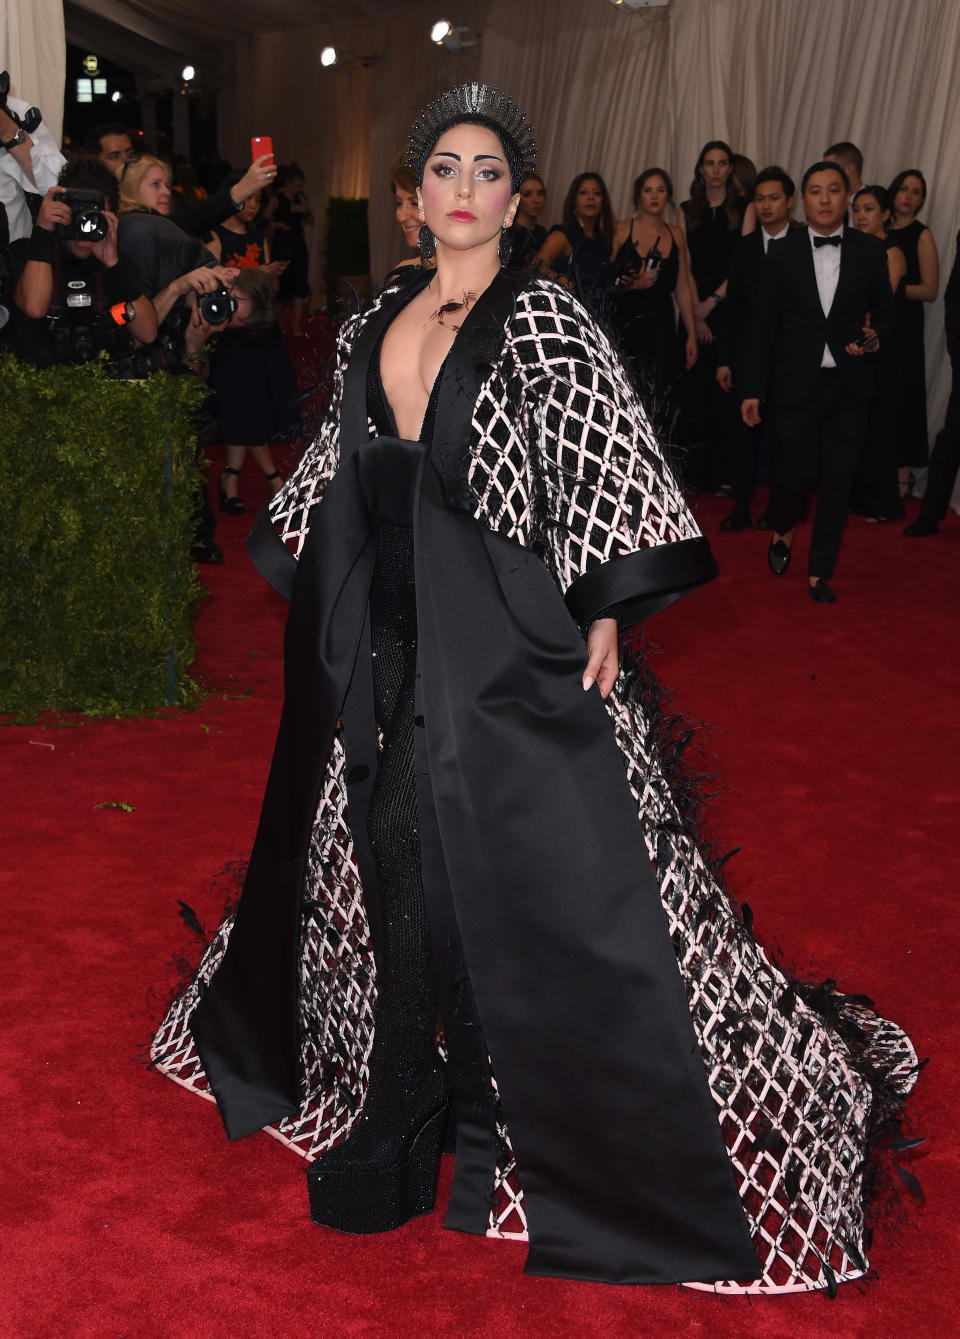 Gaga walks the red carpet at the 2015 Met Gala celebrating the opening of the "China: Through The Looking Glass" exhibit at the Metropolitan Museum's Costume Institute on May 4, 2015.&nbsp;